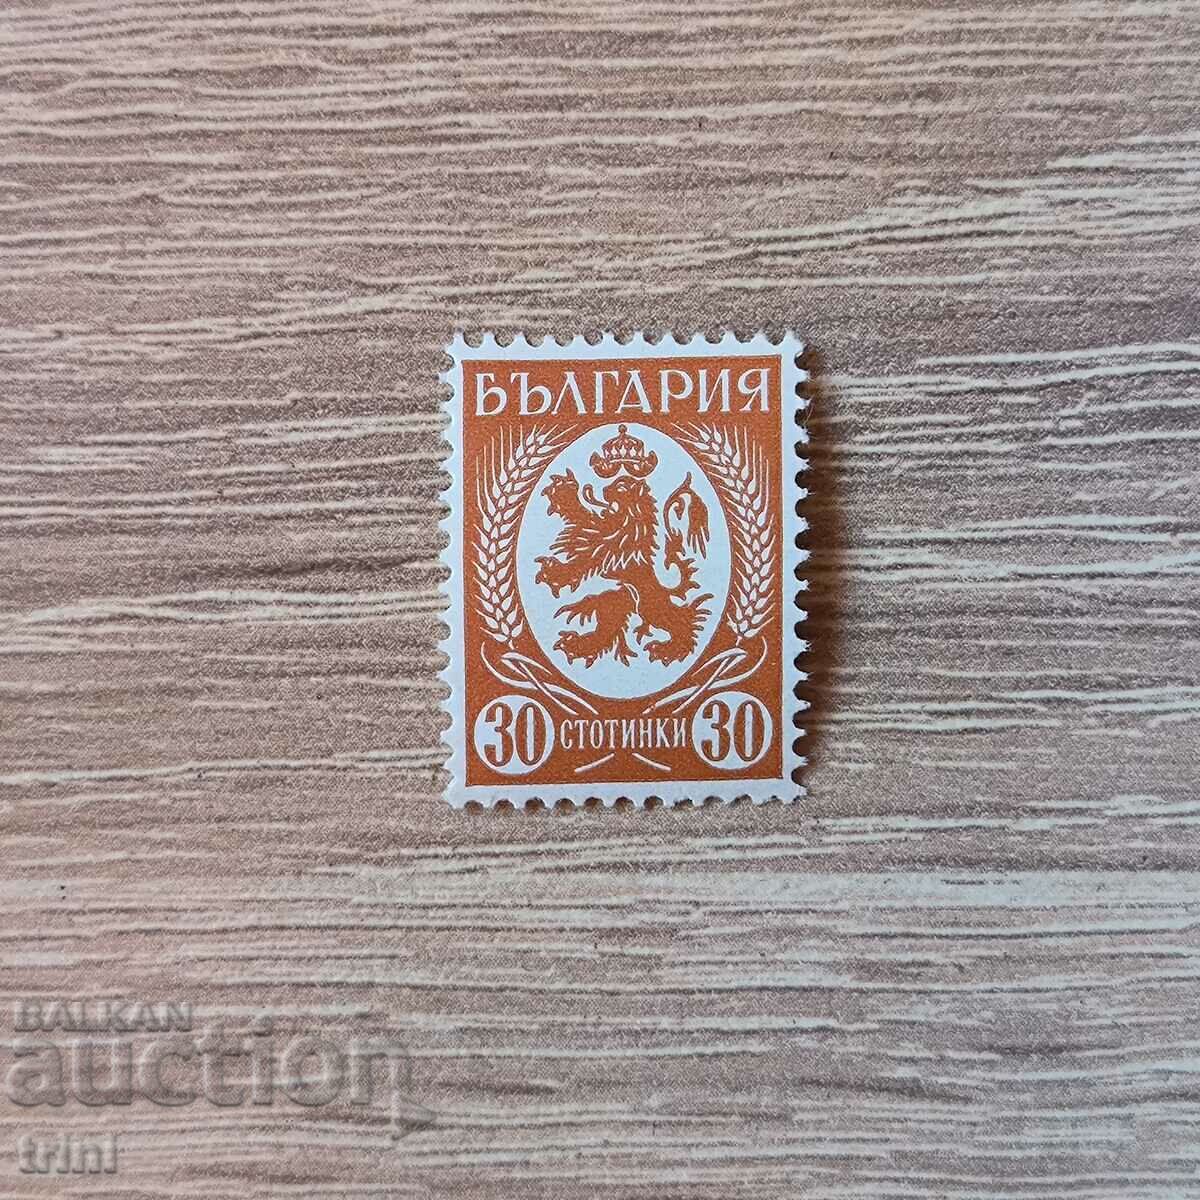 Bulgaria 1936 30 cents yellow-brown variant